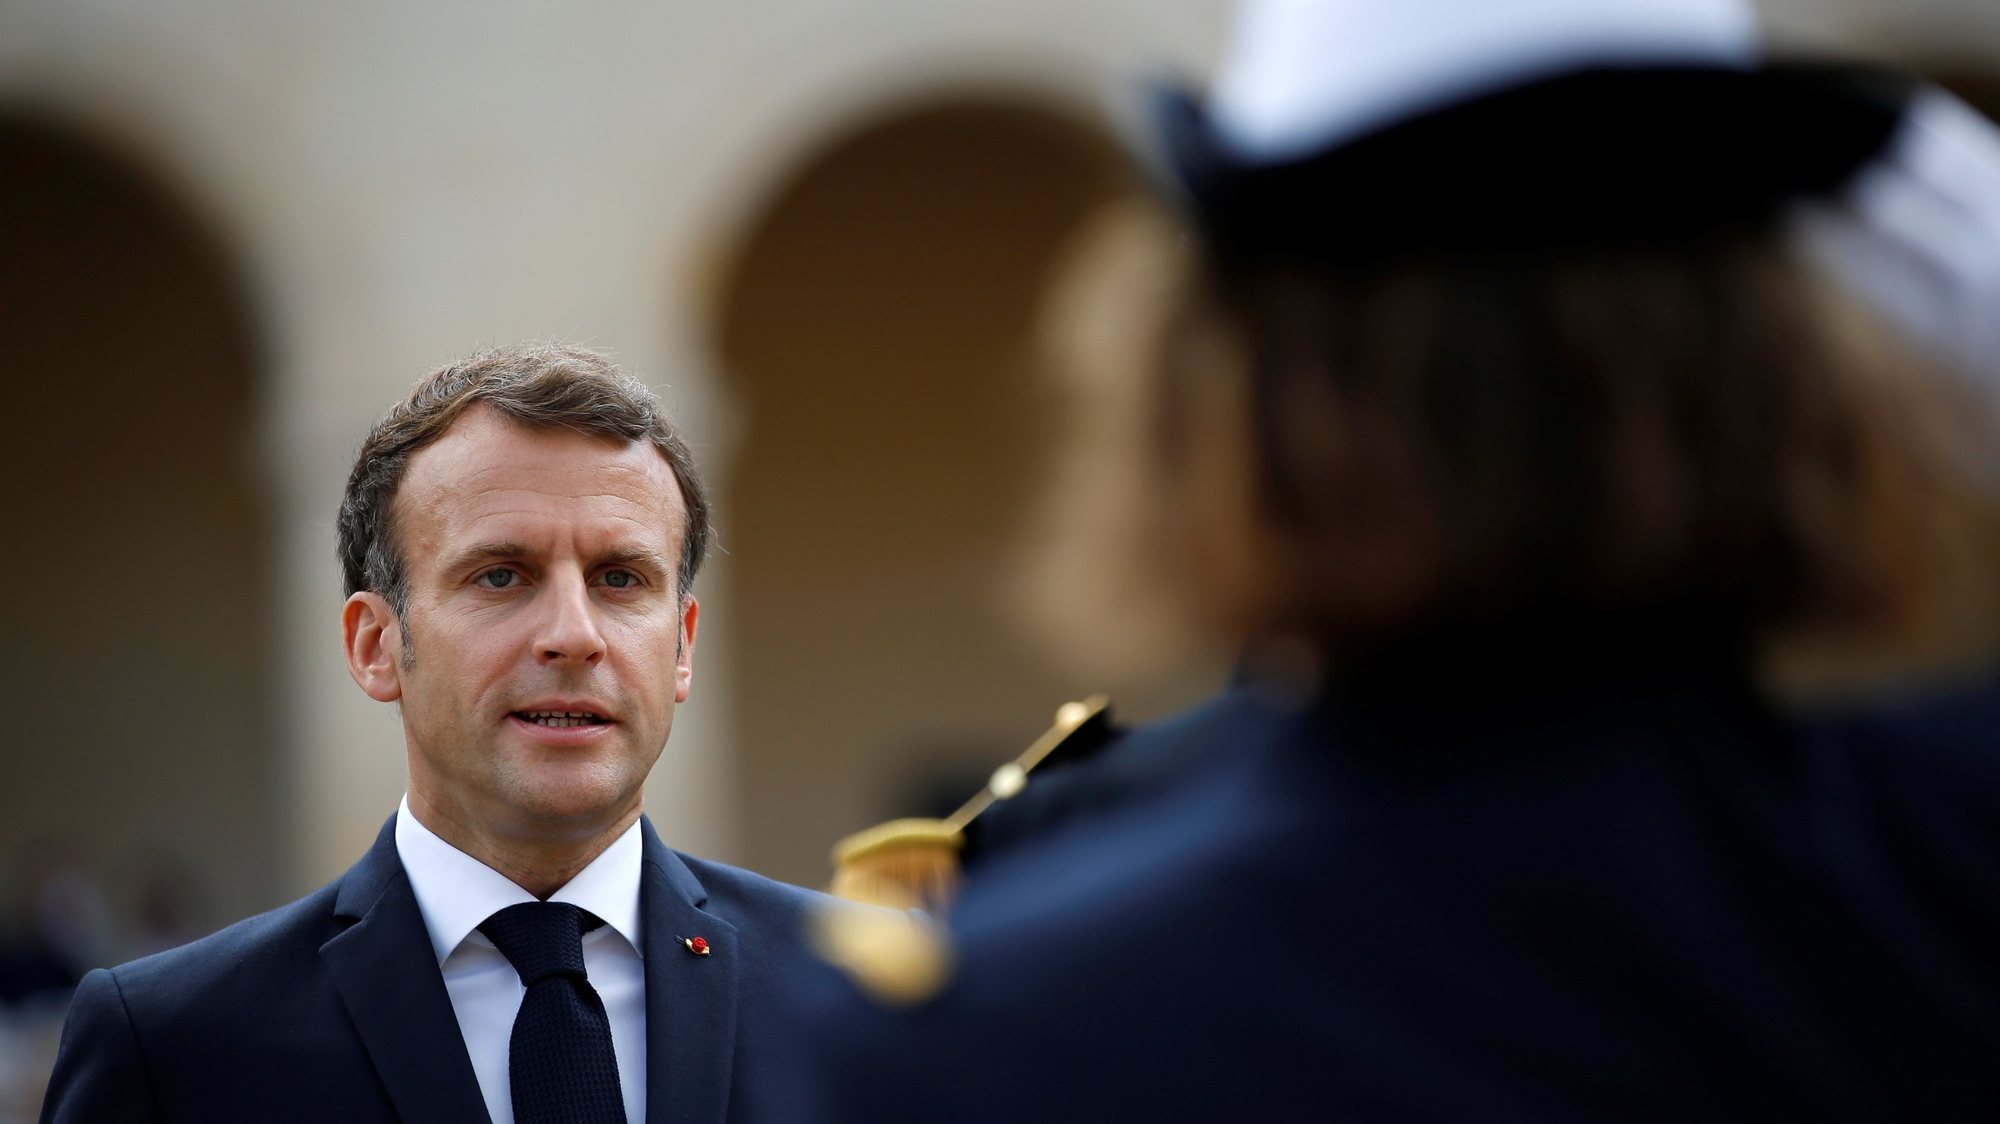 epa09330915 French President Emmanuel Macron attends a &#039;prise d&#039;armes&#039; military ceremony at the Invalides in Paris, France, 08 July 2021.  EPA/SARAH MEYSSONNIER / POOL MAXPPP OUT